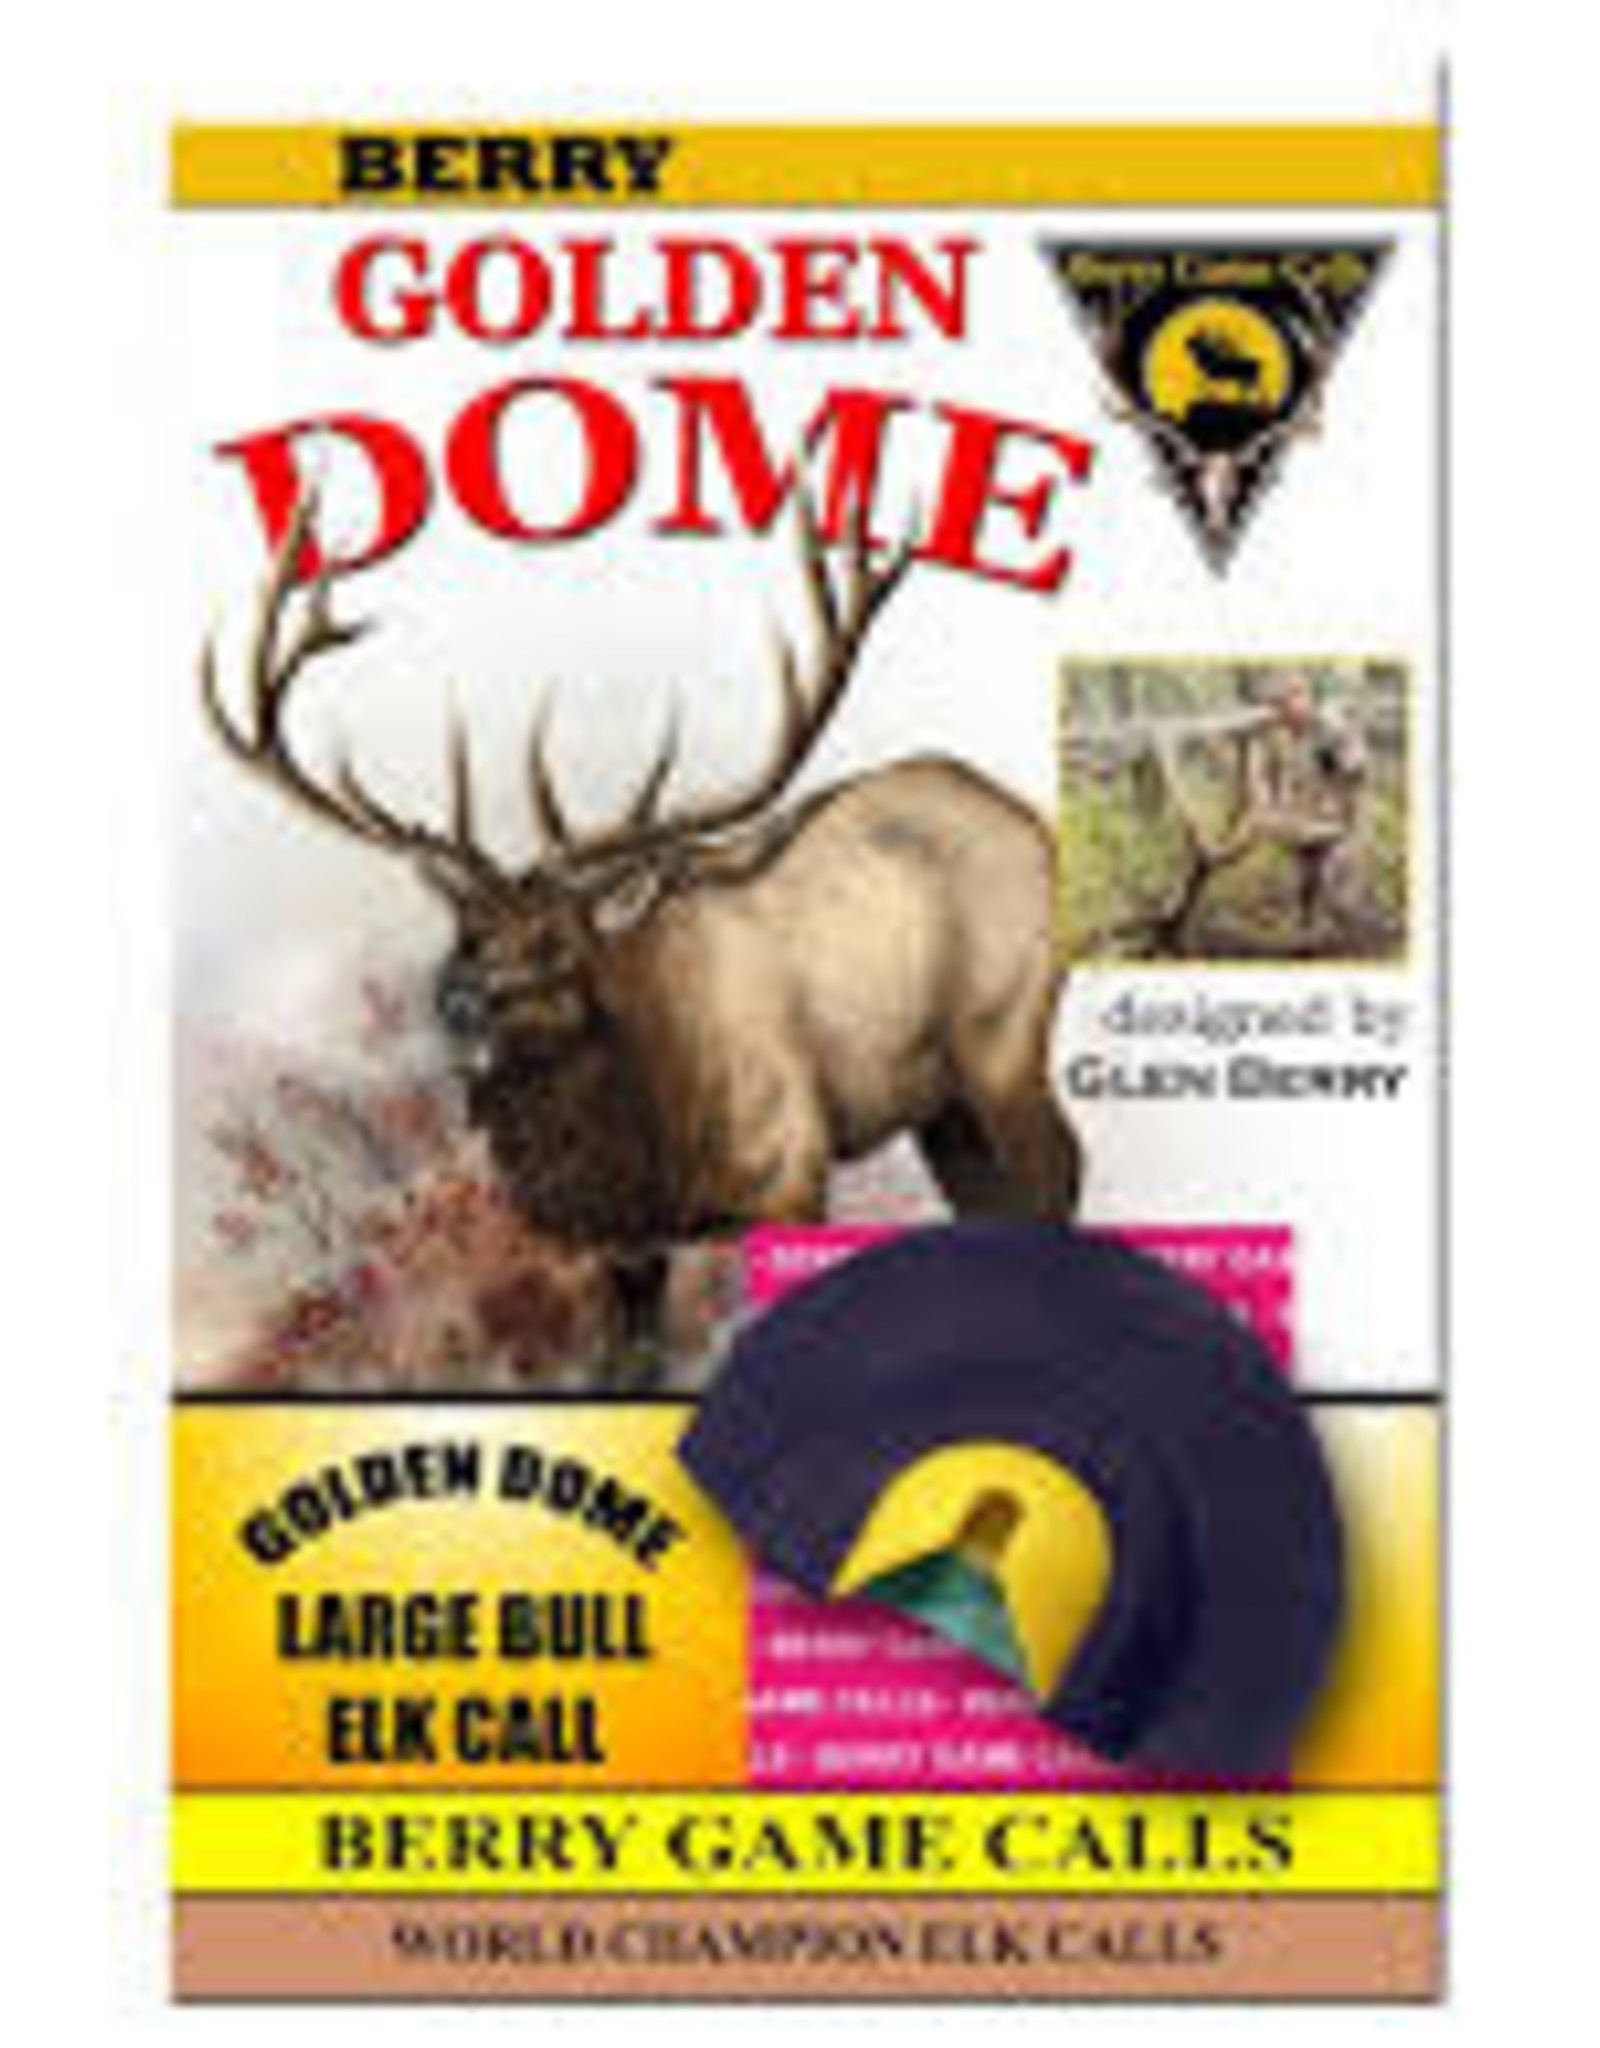 Berry Game Calls Golden Dome Large Bull Elk Call